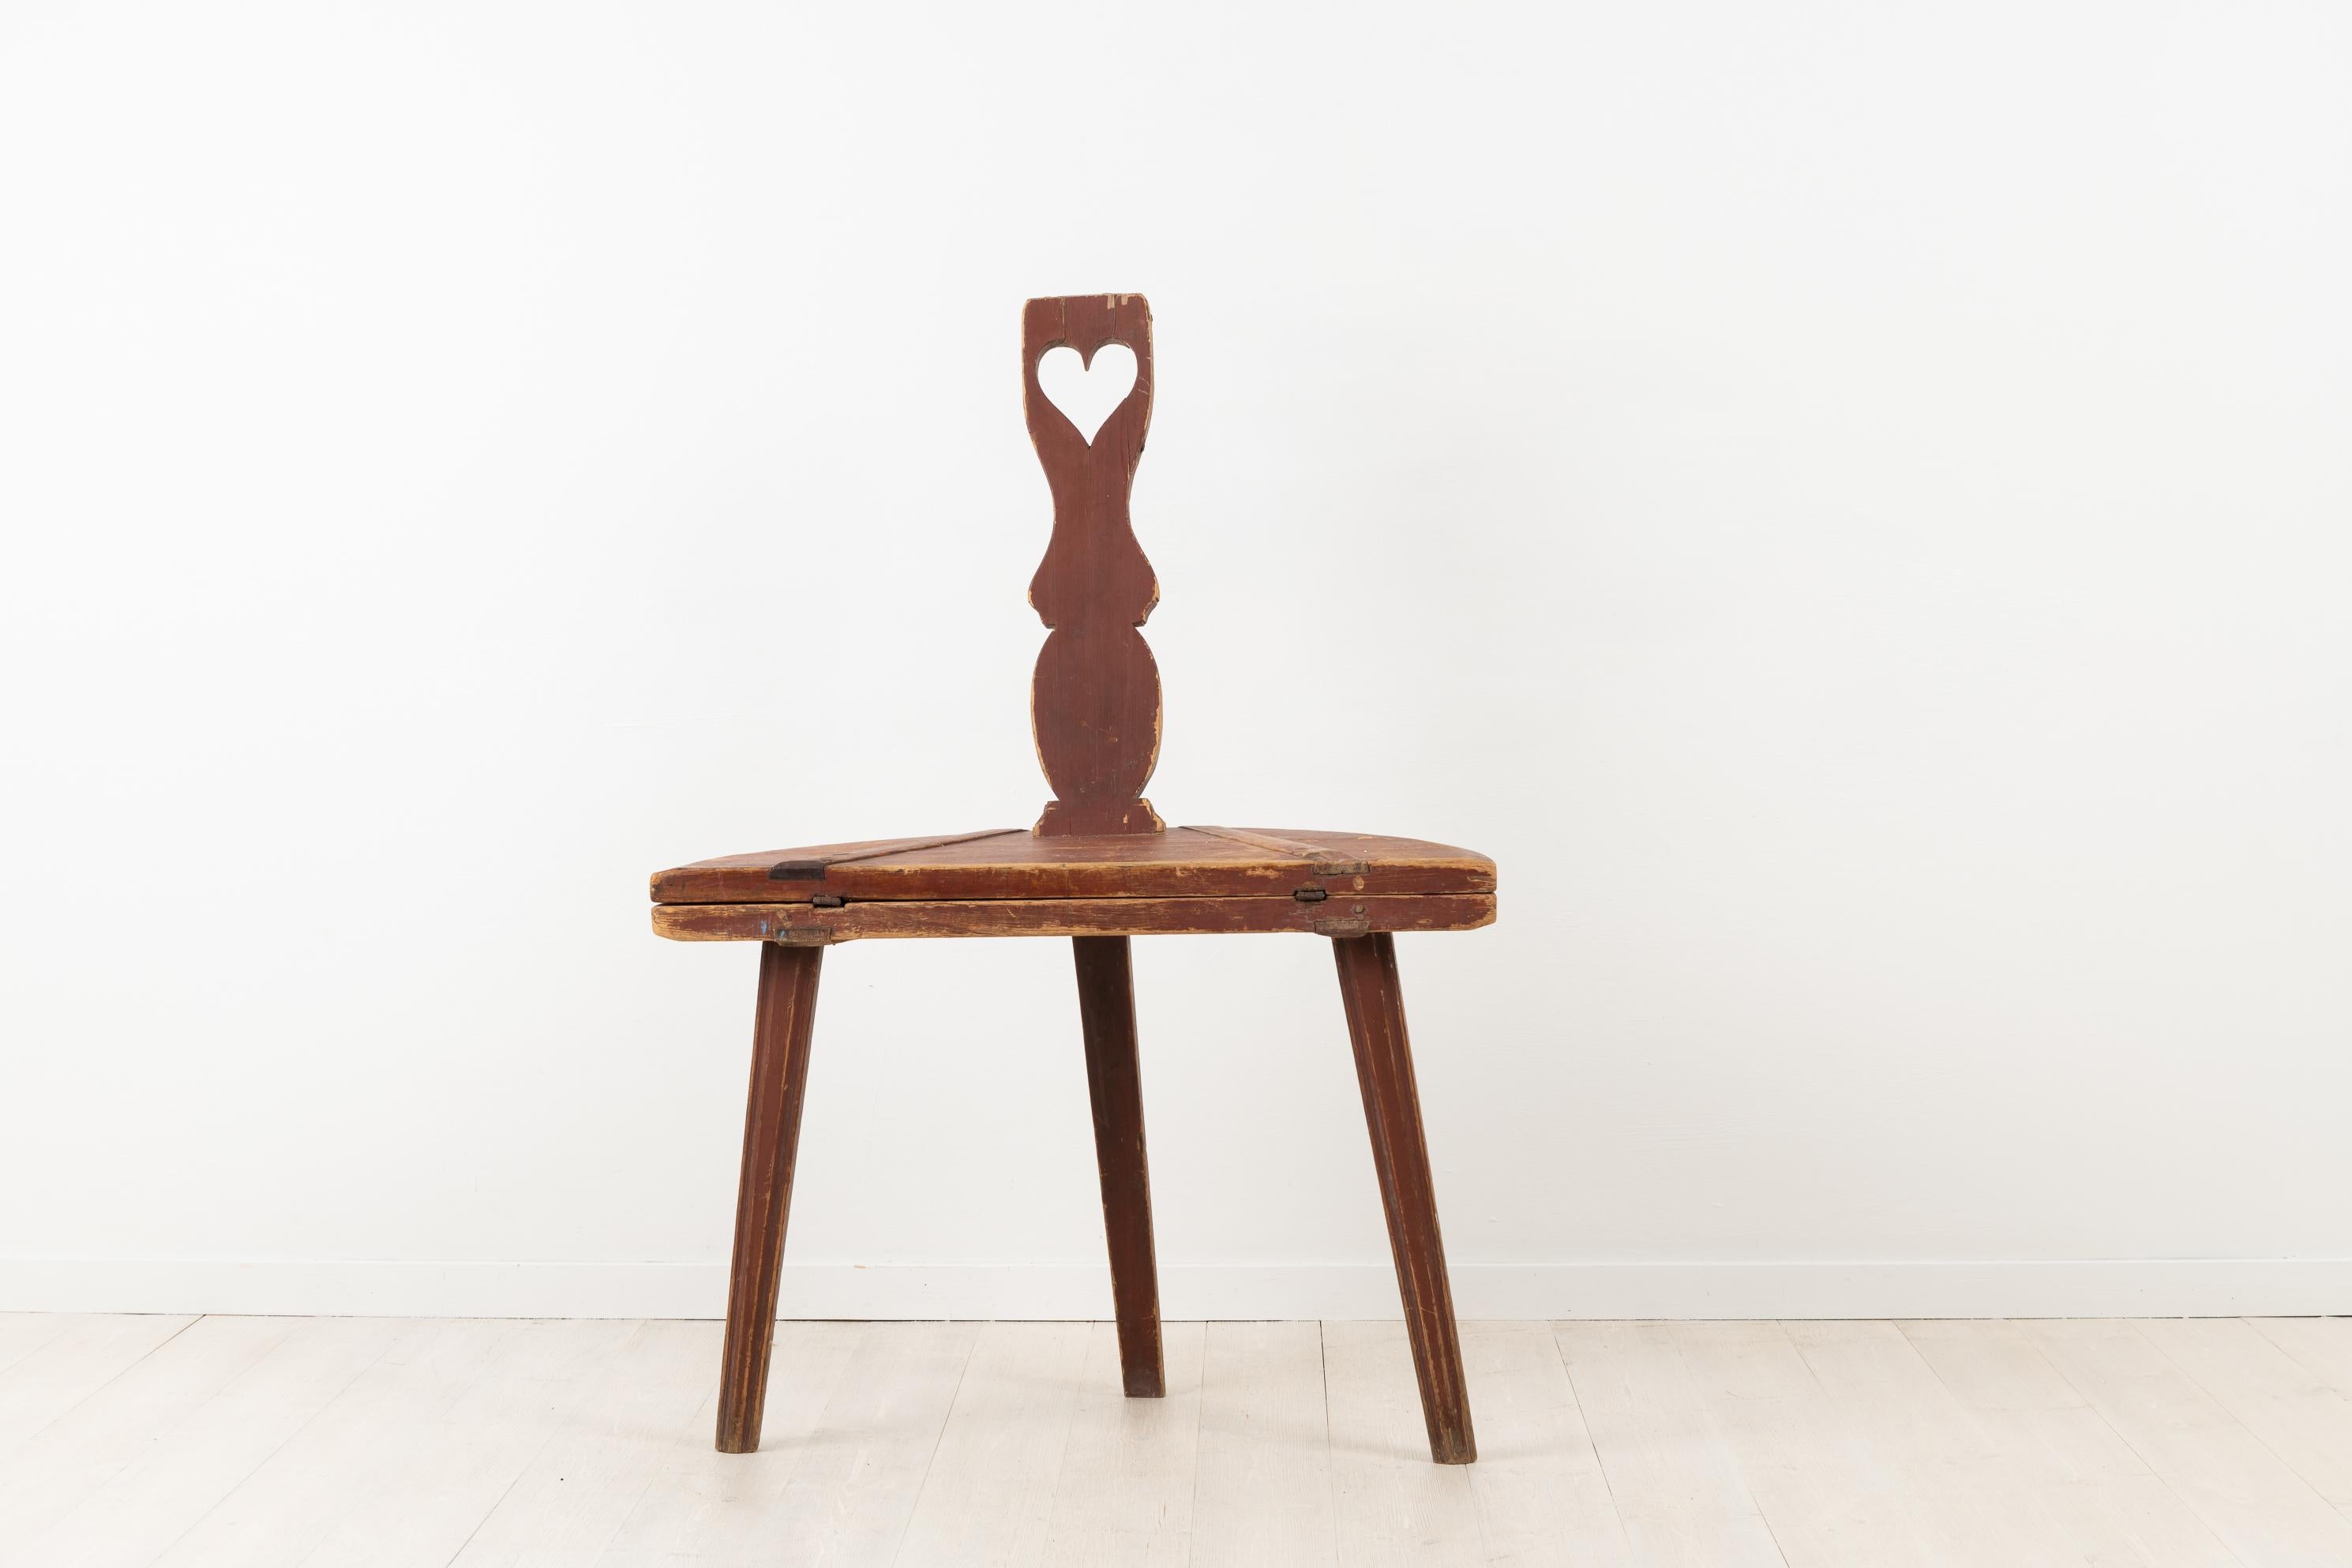 Folk Art combination furniture table and chair. Combination furniture are great for small spaces and this works well as a coffee table or side table. Made early 1800s, circa 1820-1840. Decorated with a heart. Made in pine with original distressed